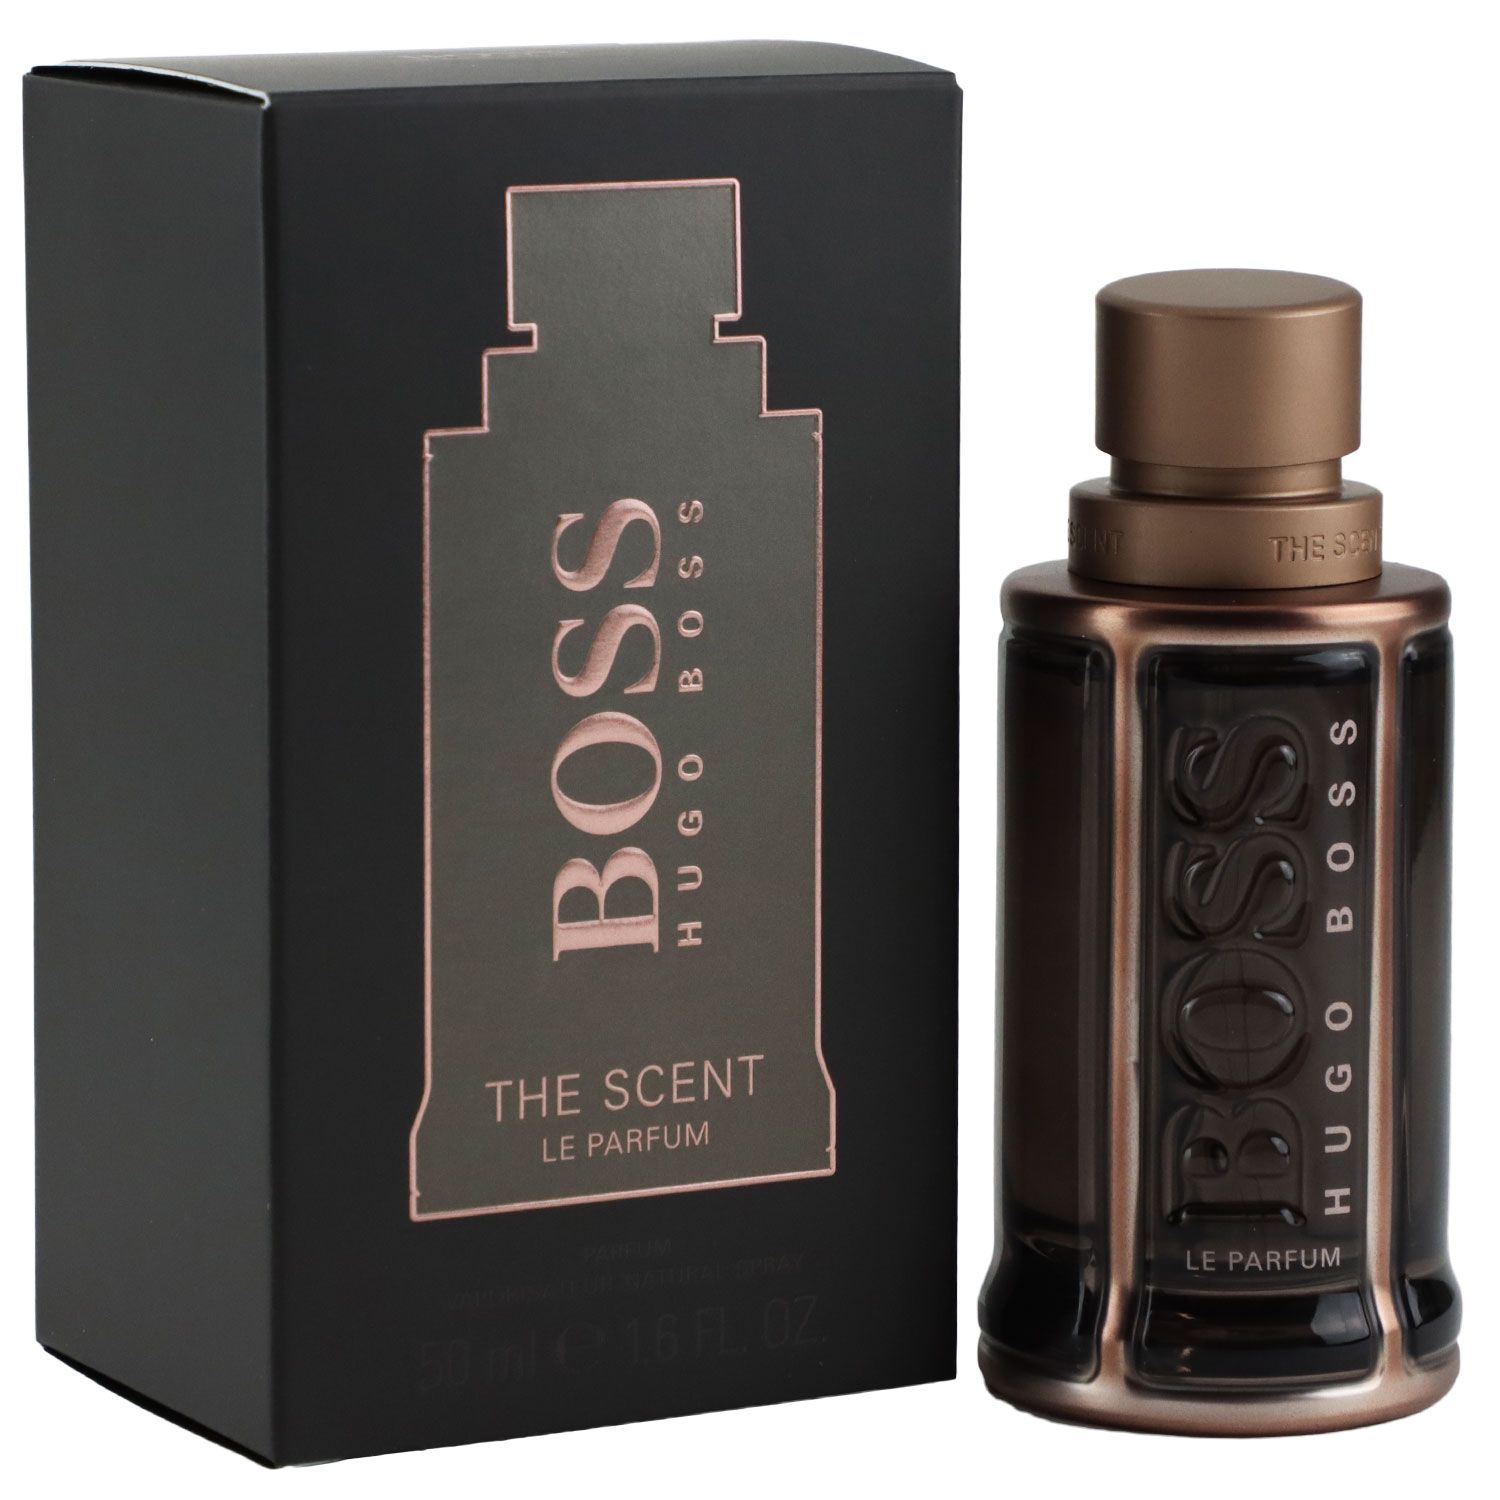 Le scent hugo boss. Hugo Boss the Scent le Parfum. Boss the Scent le Parfum. Лонг черный для мальчика Хьюго босс. Boss the Scent Magnetic for him.